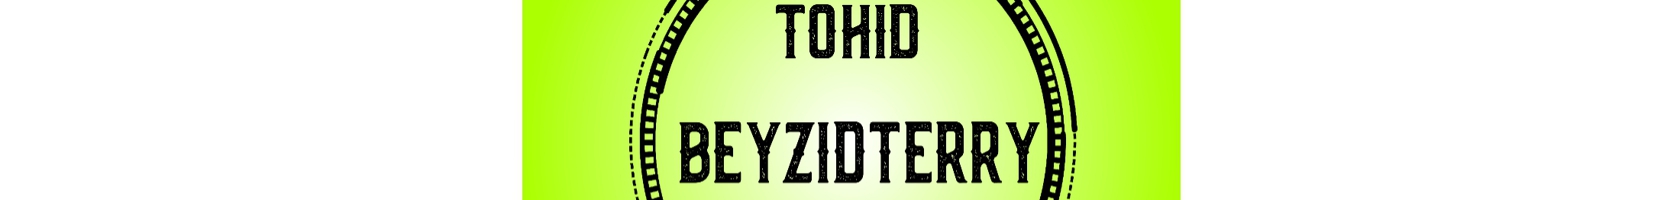  Tohid Beyzidterry